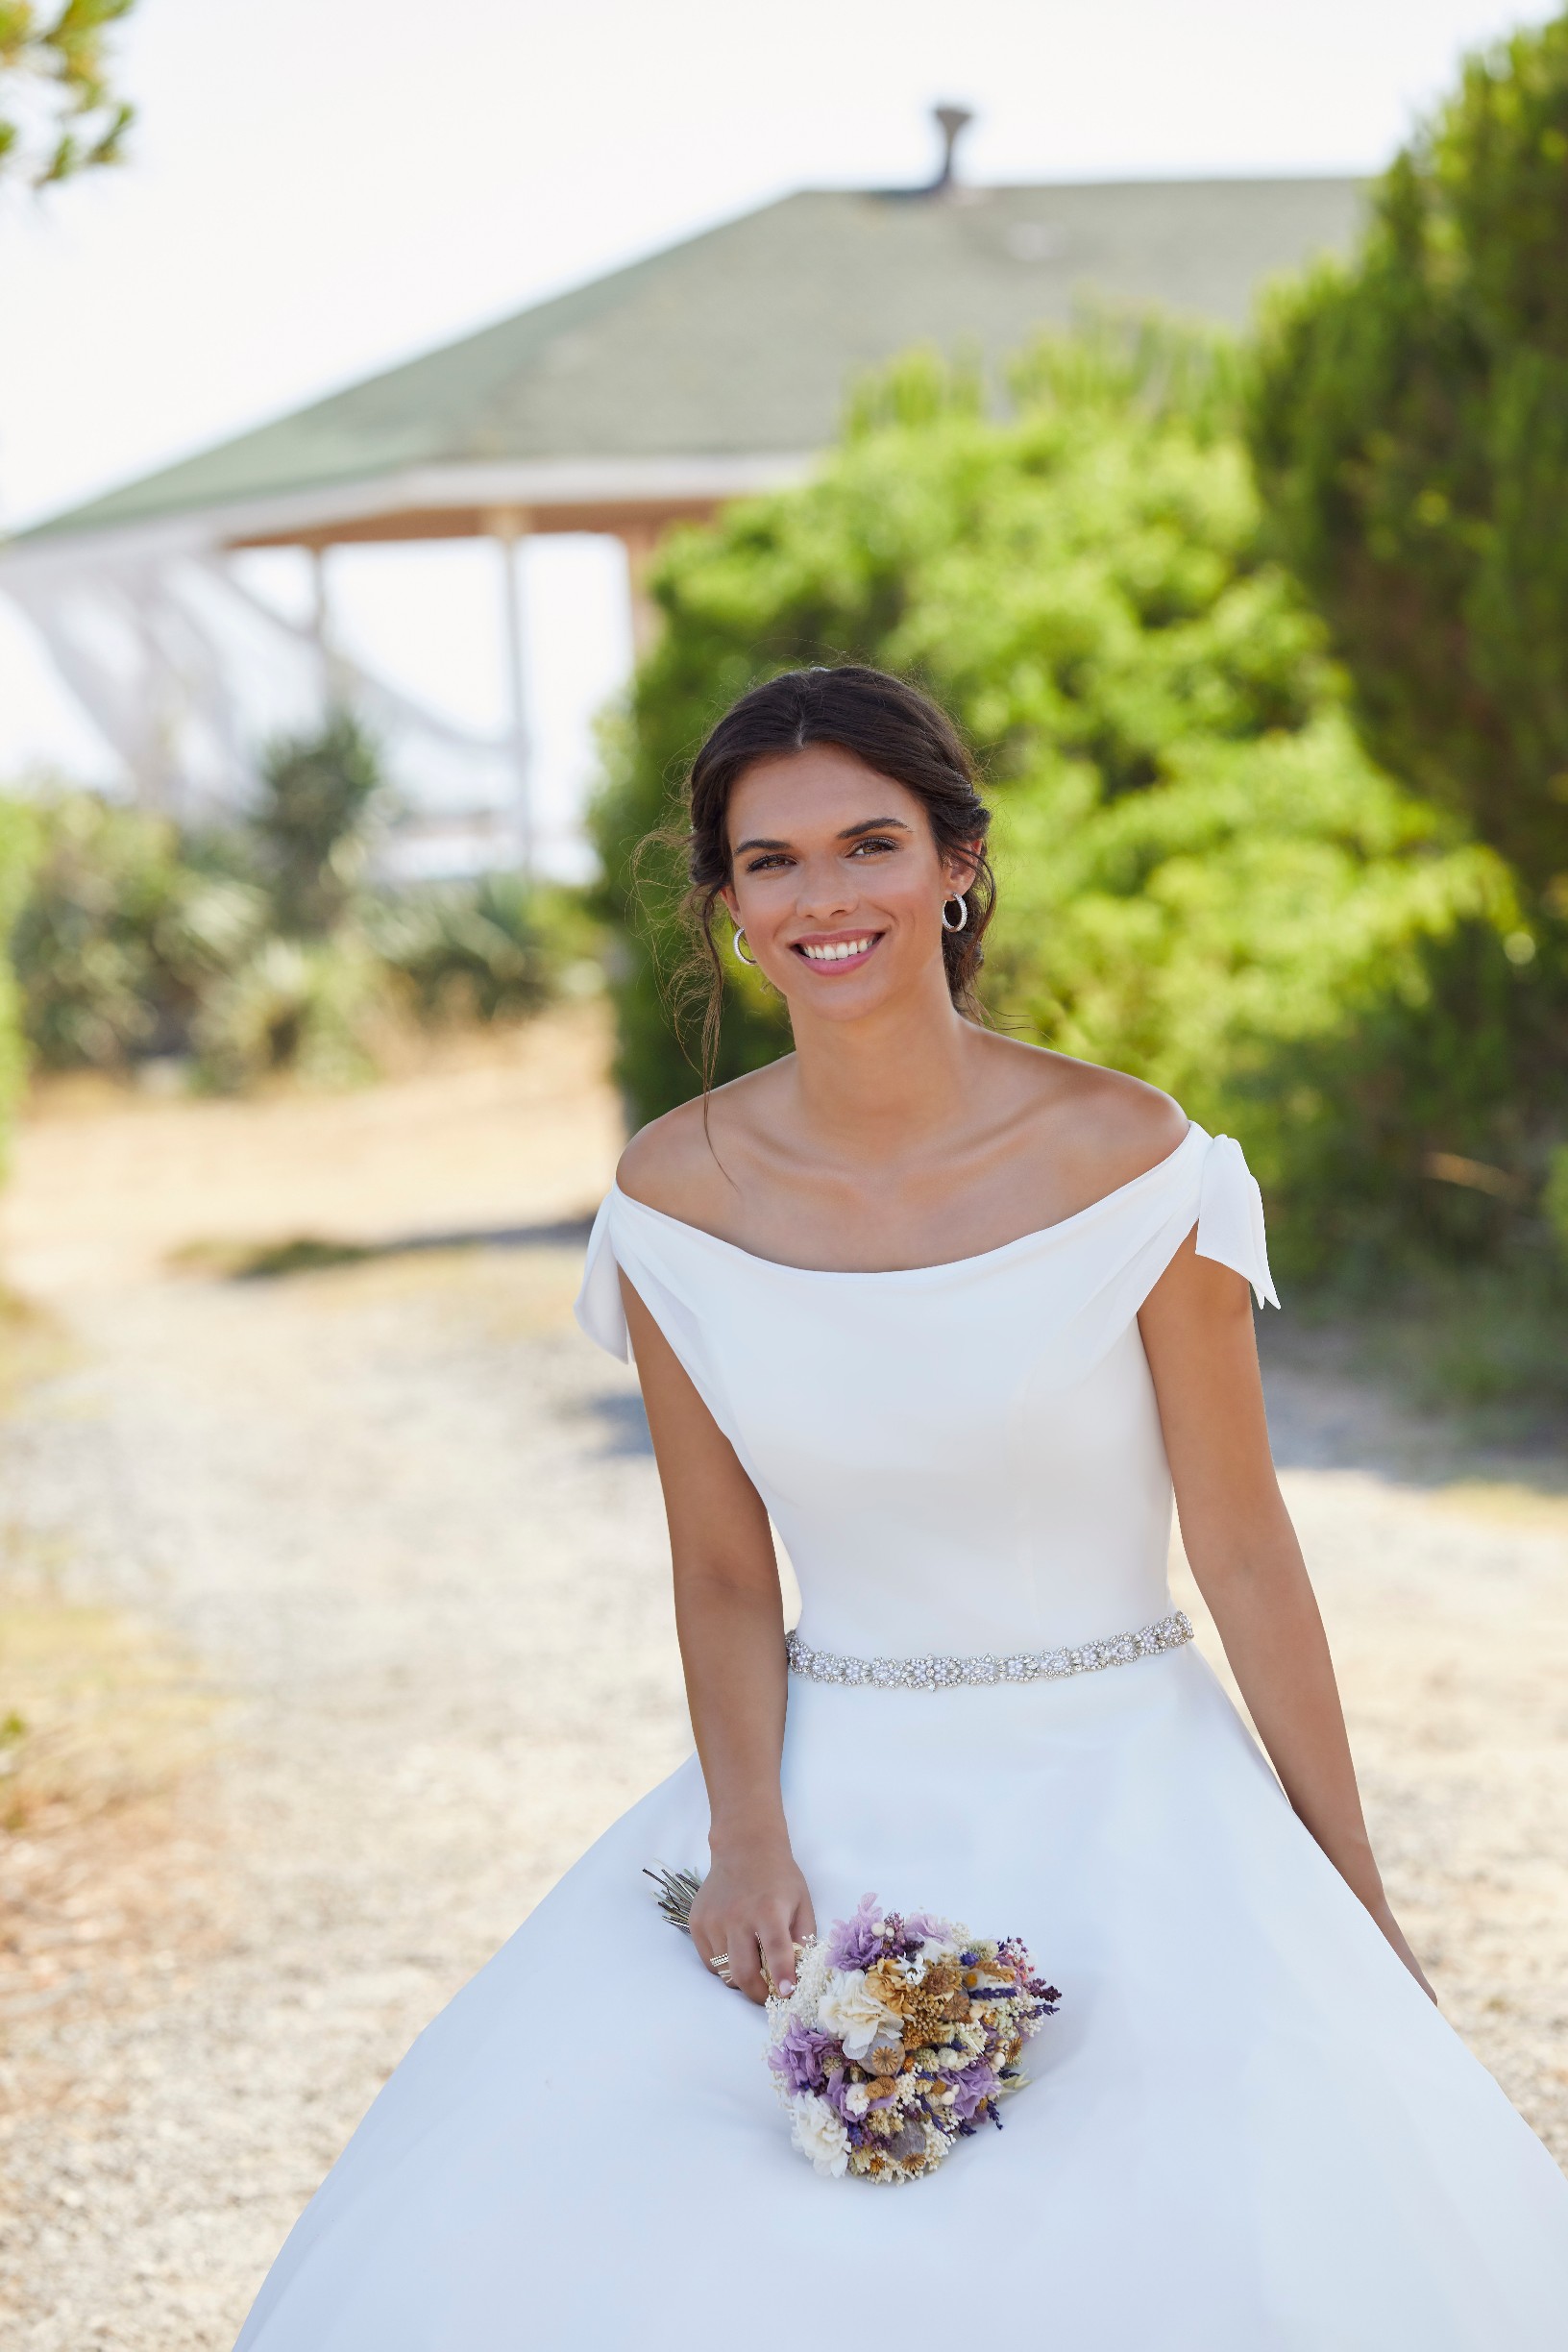 Brunette woman standing in garden in warm and sunny climate wearing off the shoulder ballgown wedding dress with delicate bow detail